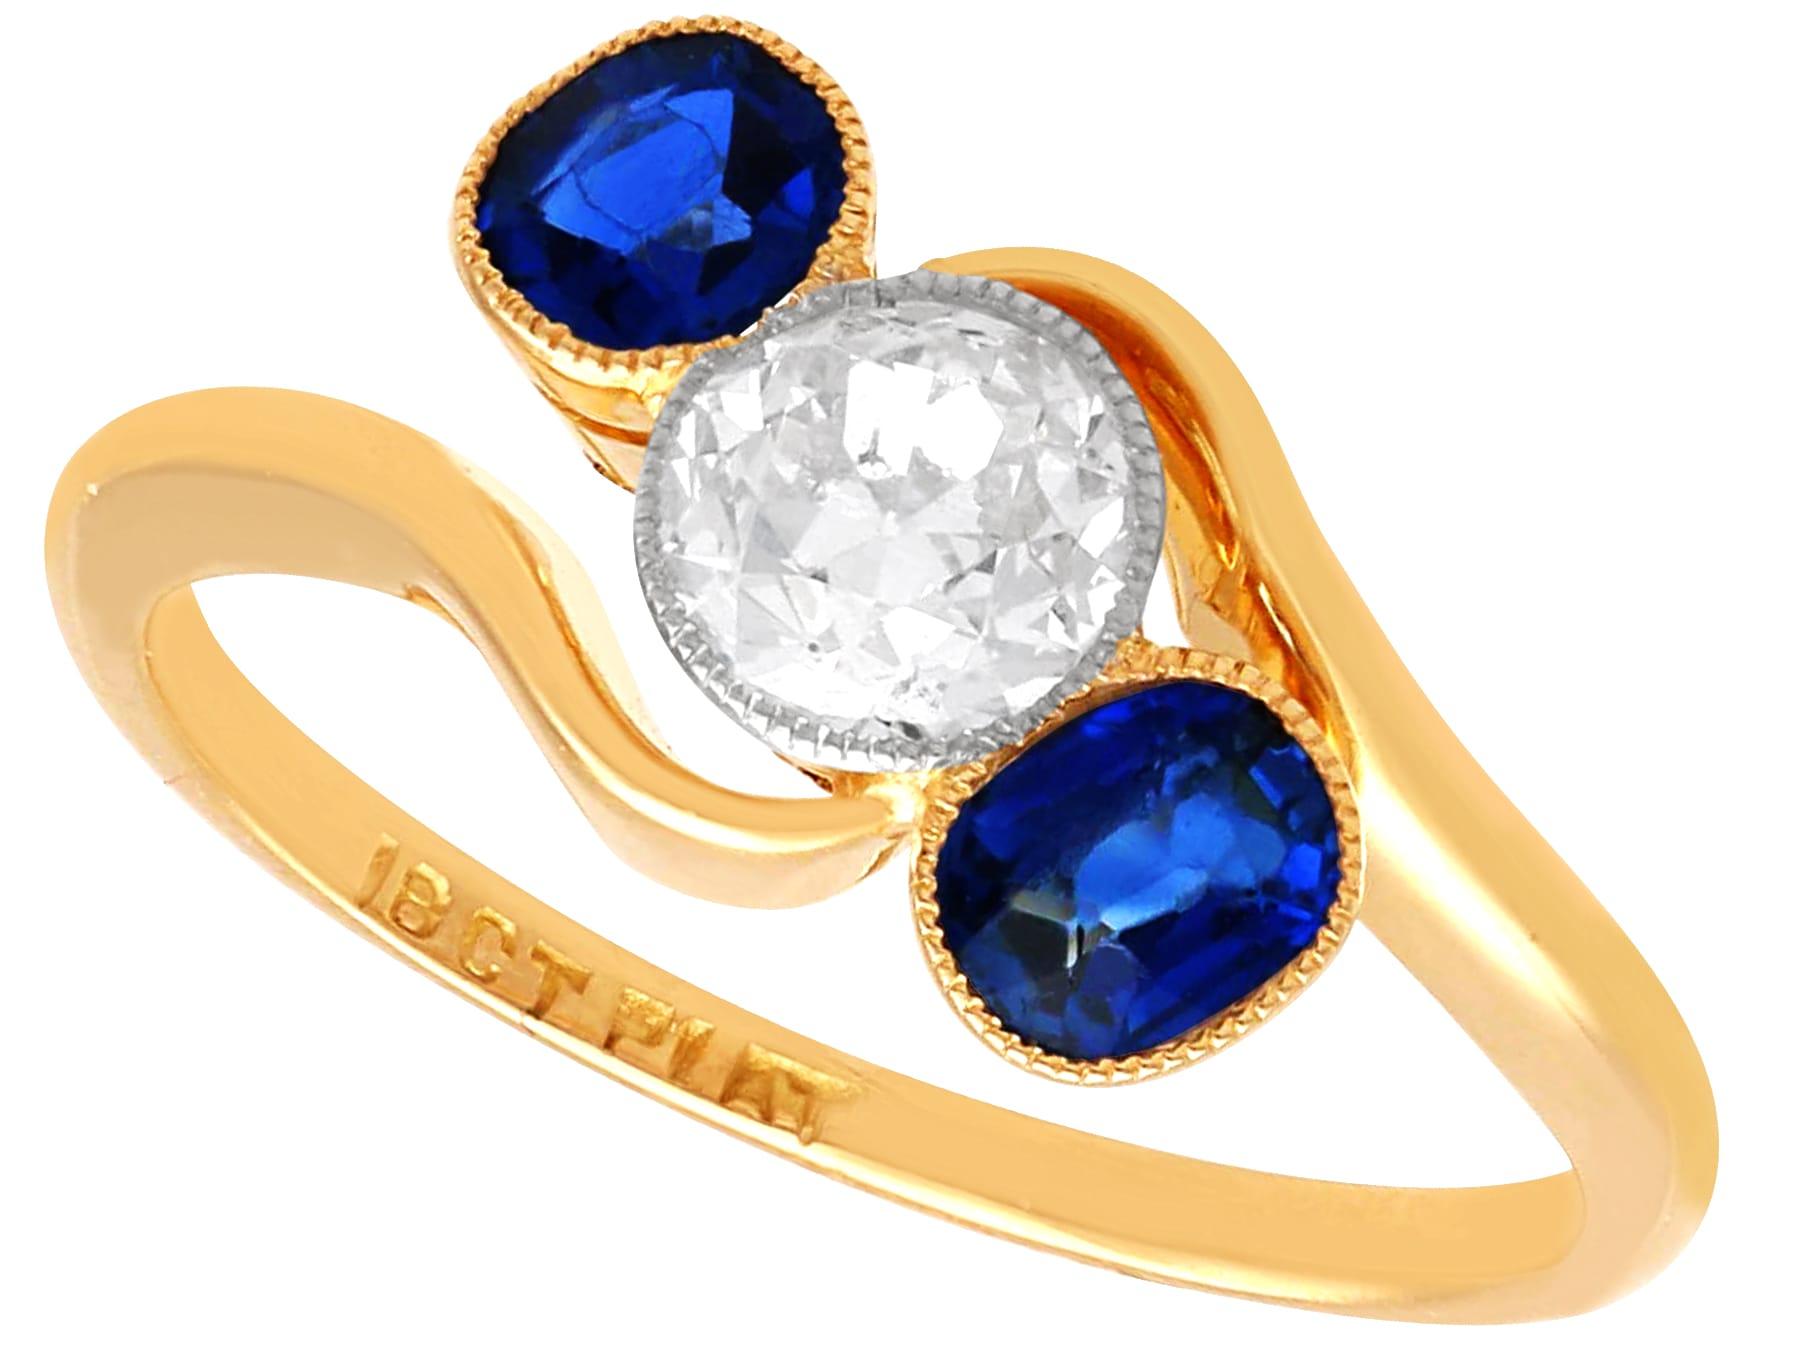 Antique Sapphire and Diamond Twist Ring in 18k Yellow Gold 